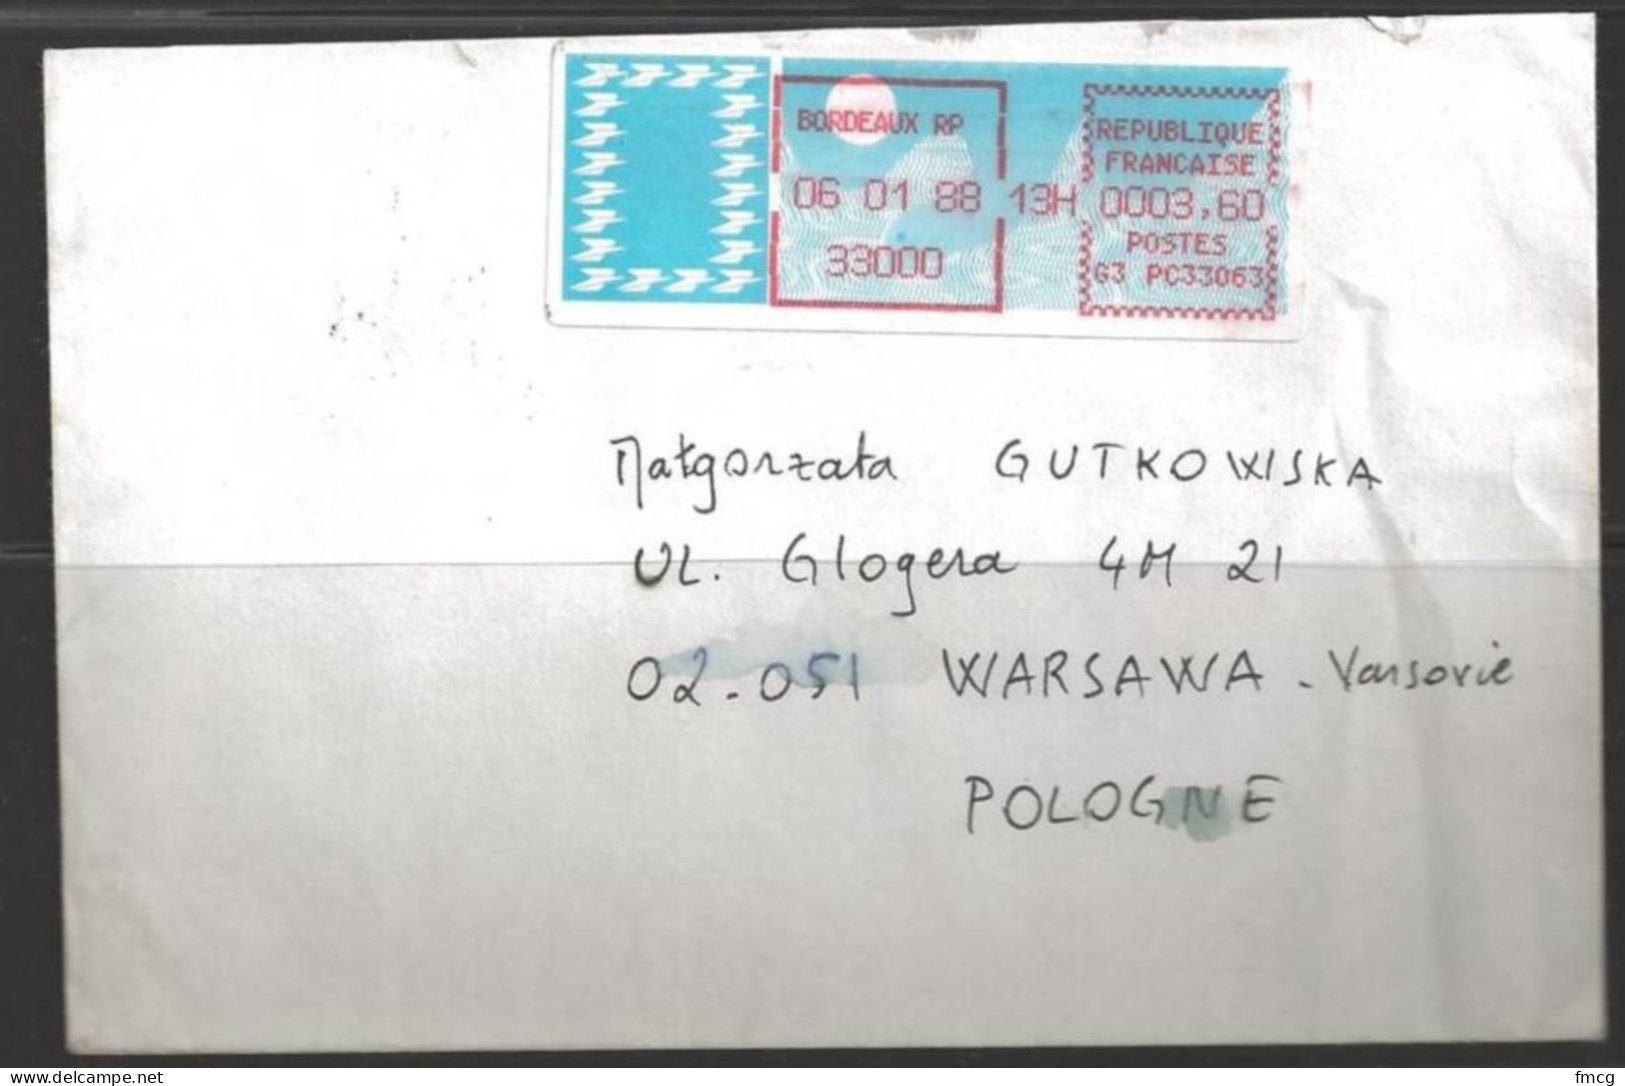 1988 Bordeaux Meter (06 01 88) To Warsawa Poland - Covers & Documents